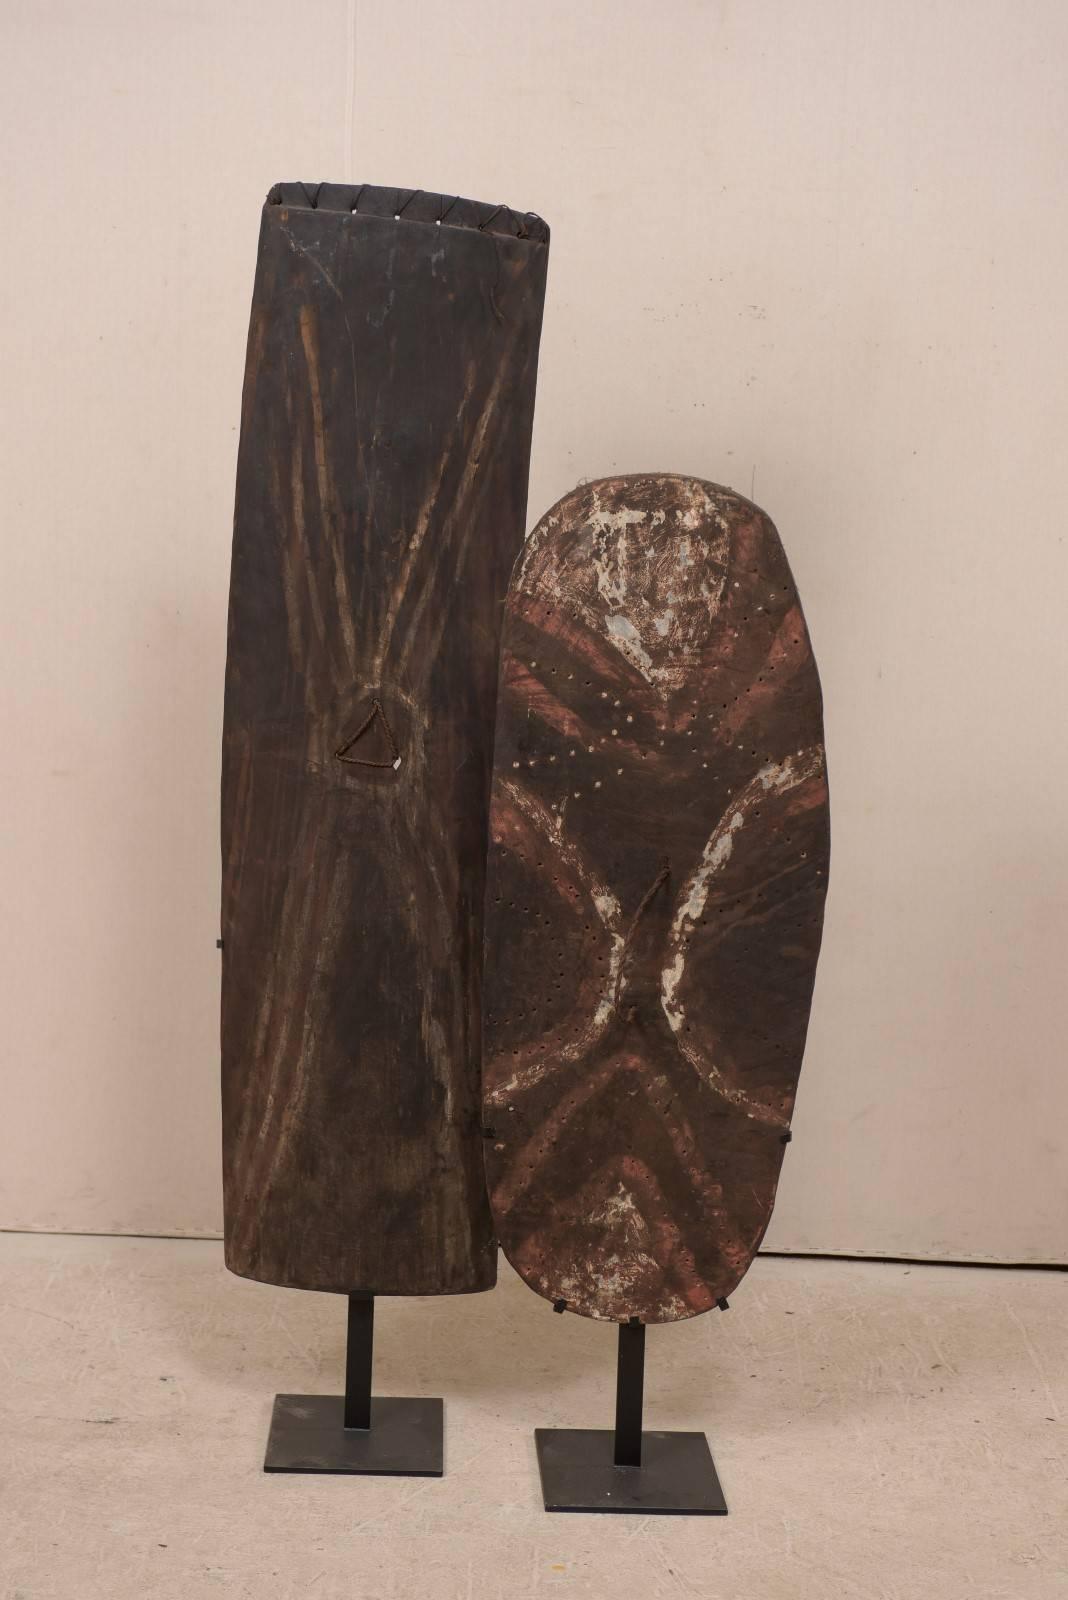 A pair of Papua New Guinea wooden shields on custom stands from the mid-20th century. These oceanic war shields were not only created for protecting oneself for tribal warfare, but also in ancestral and ritual worship. They are adorn in various